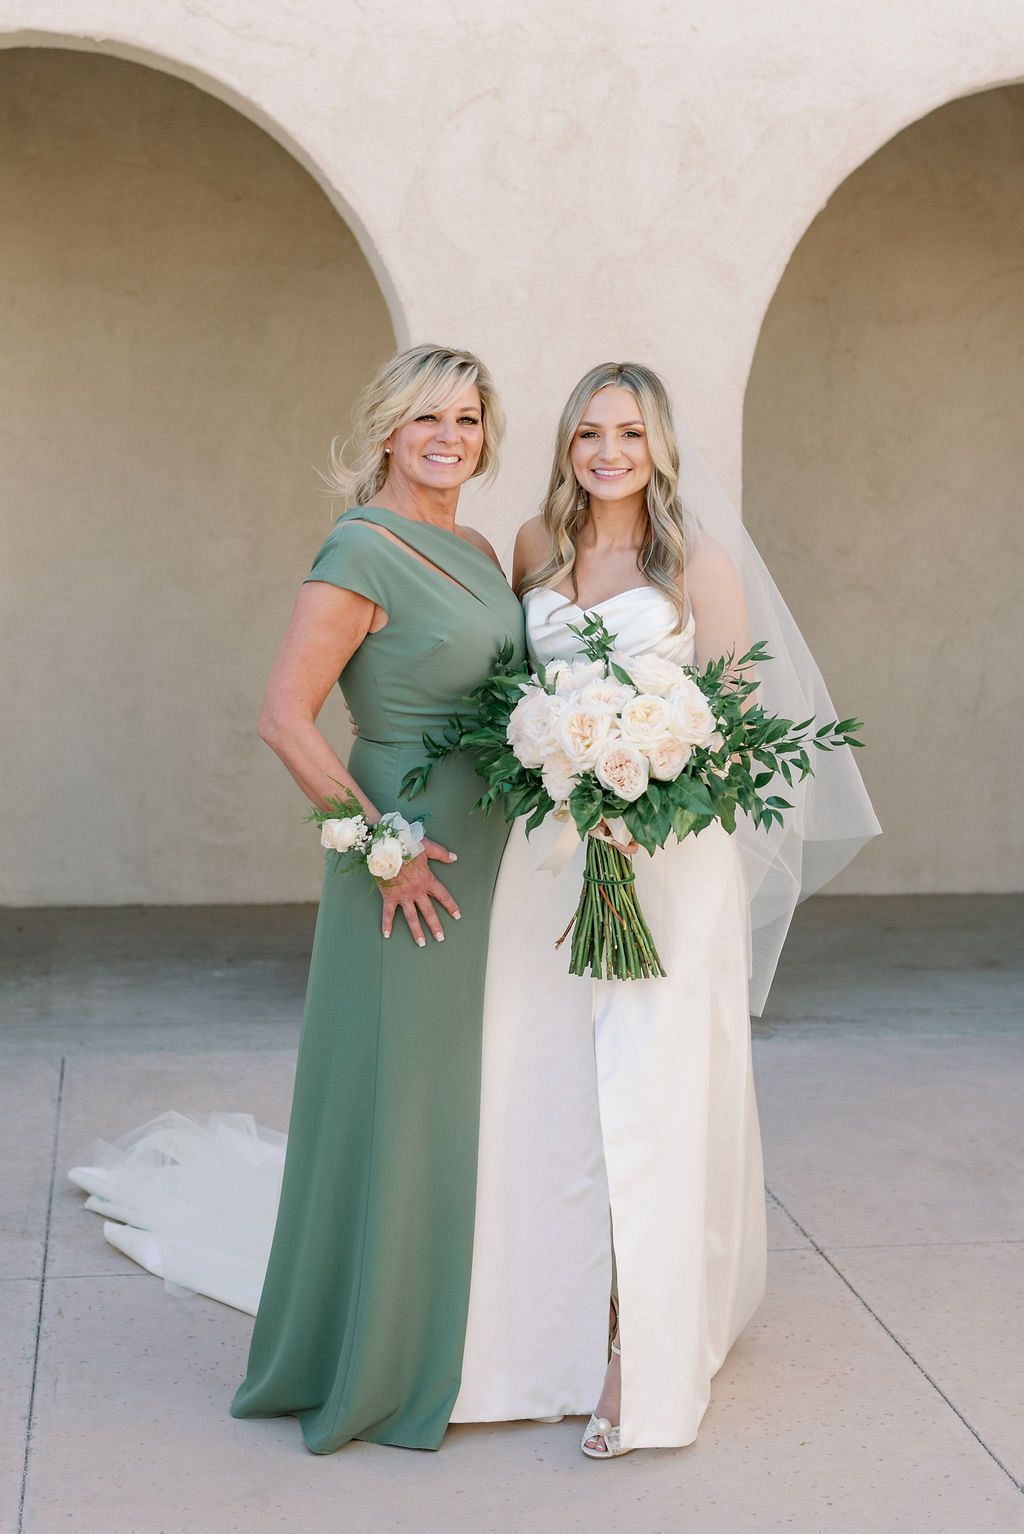 The perfect design and size for mother of
the bride dresses